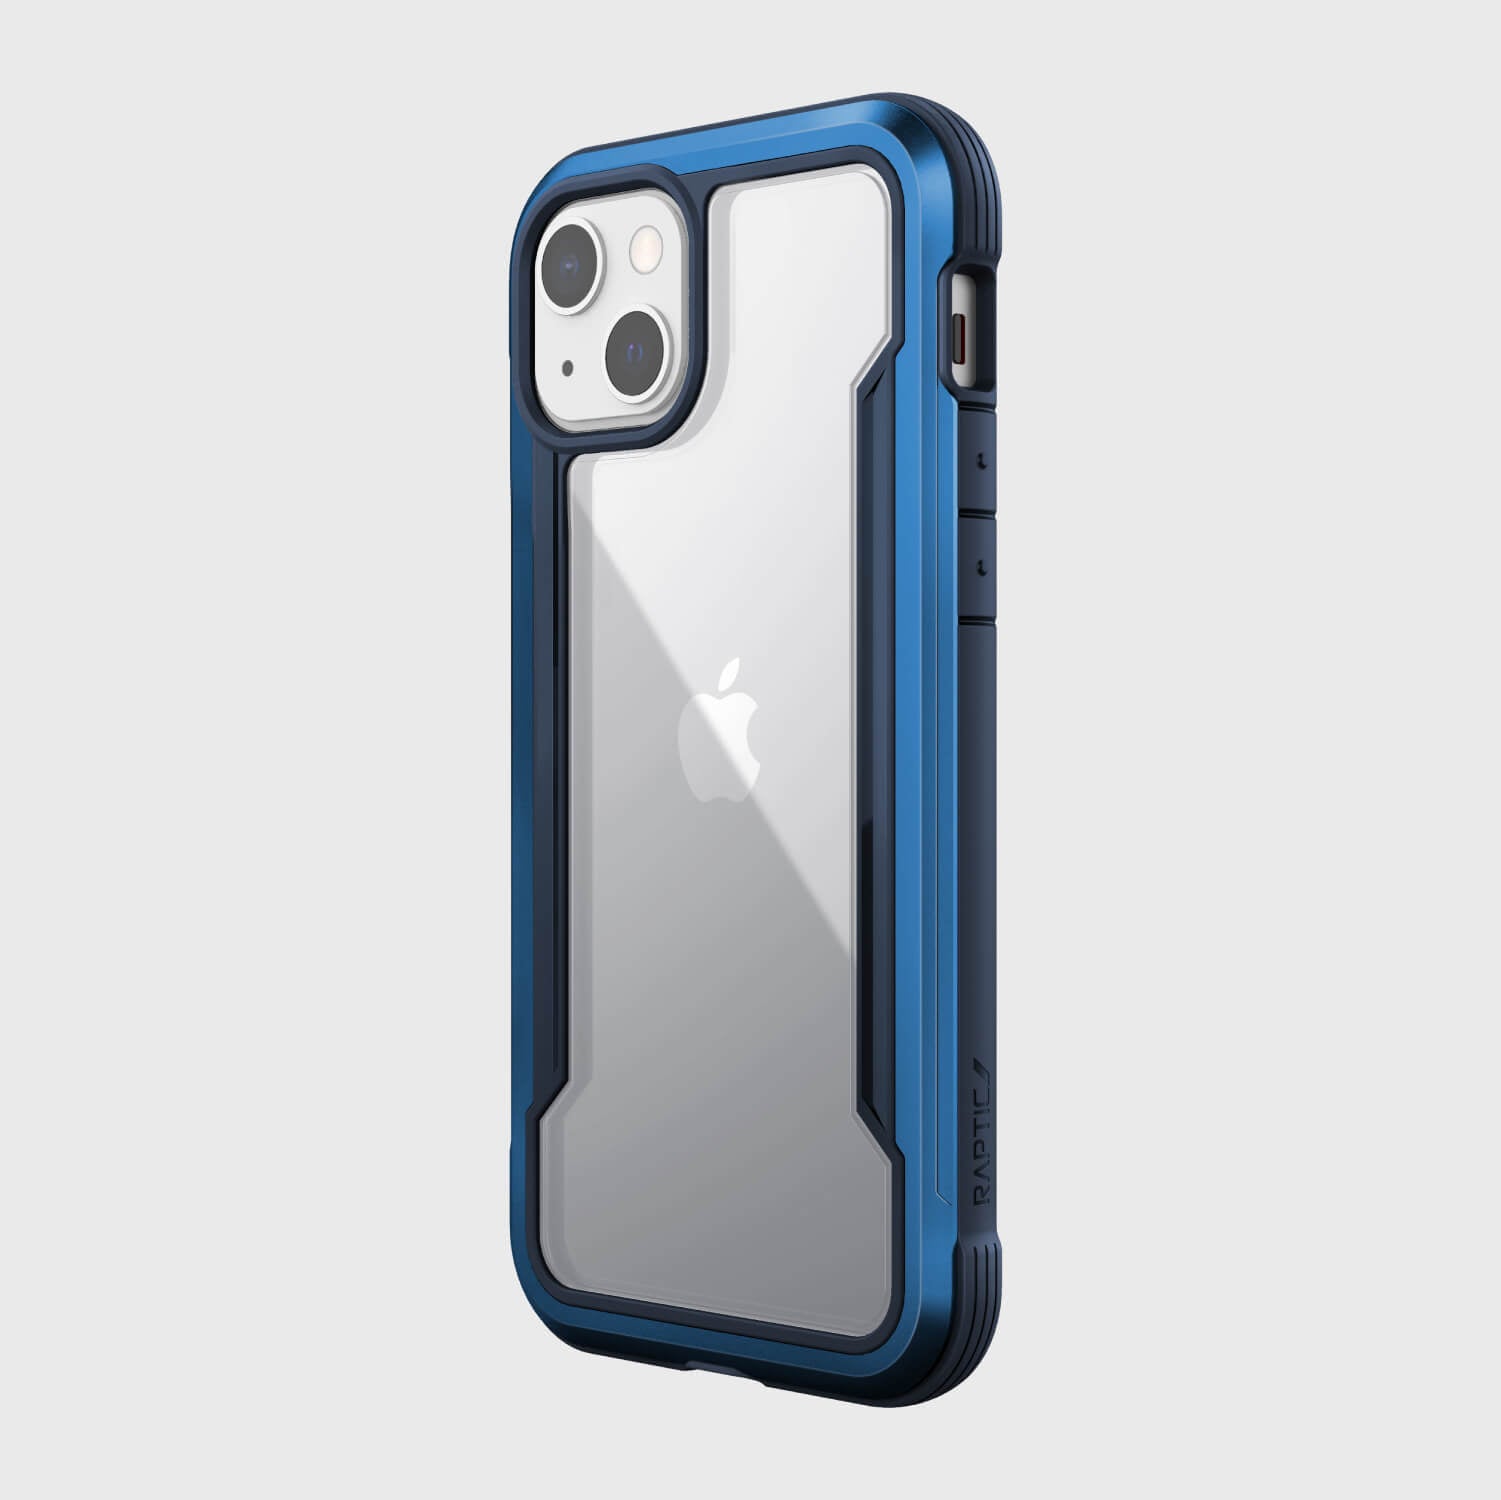 The back view of the iPhone 13 Mini Case - SHIELD PRO by Raptic in blue.